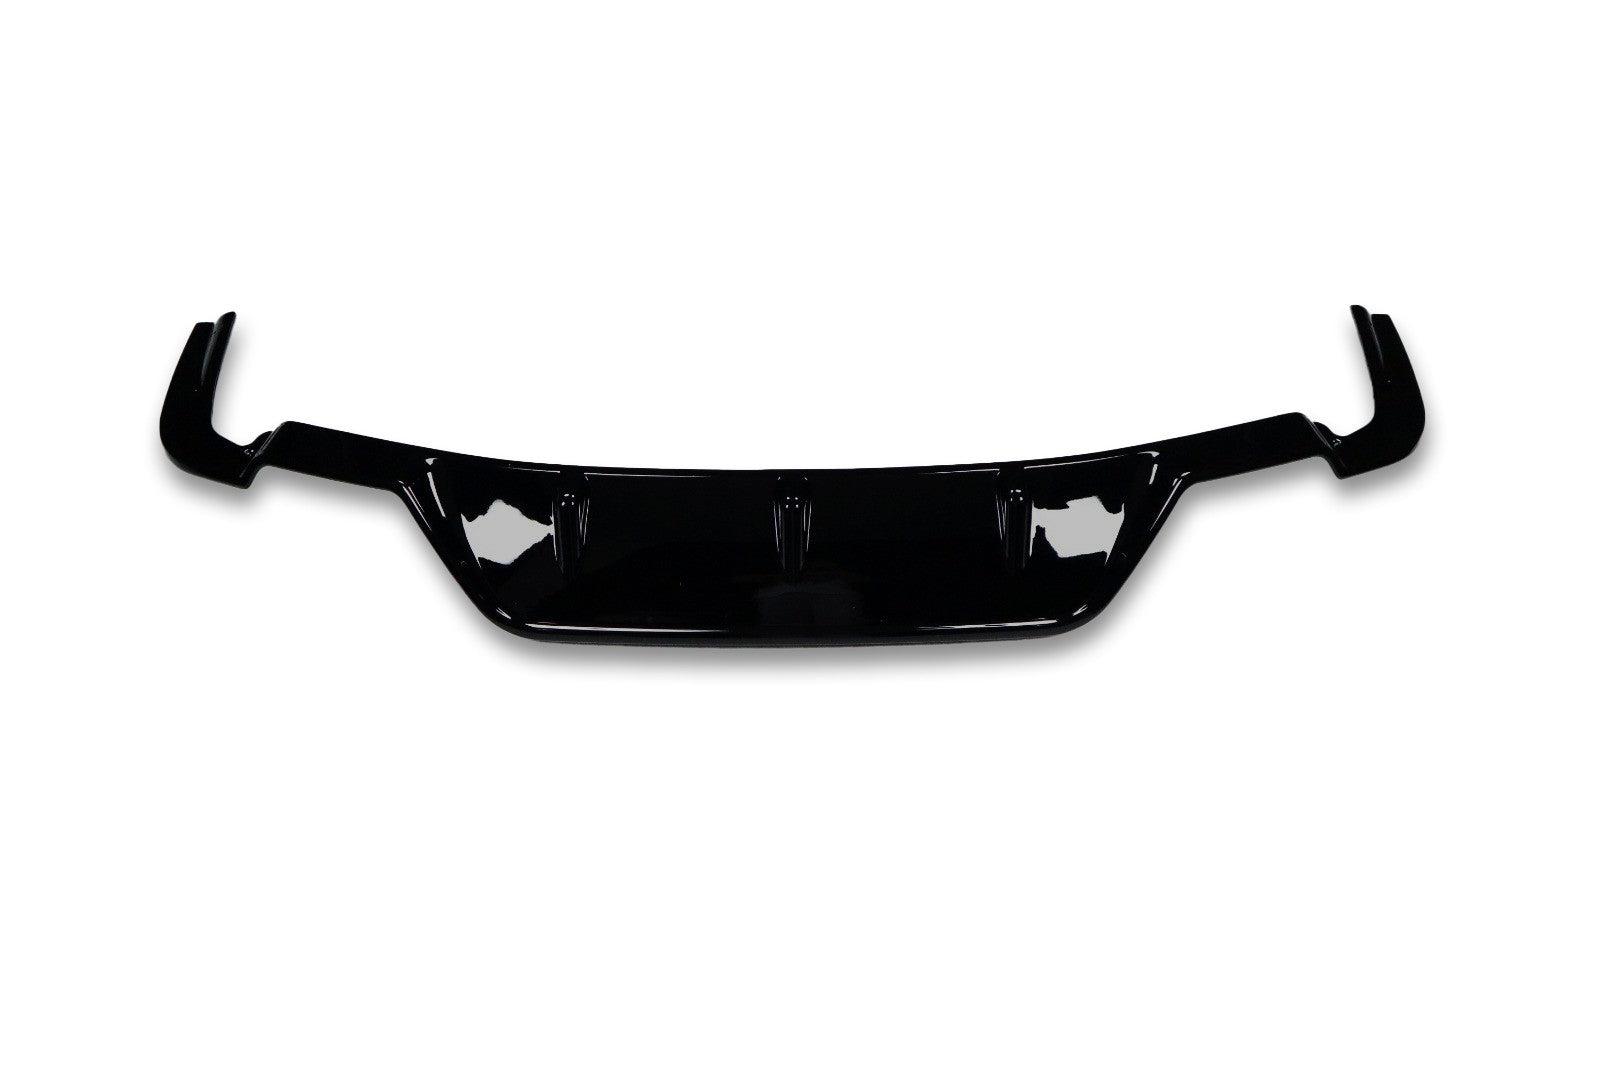 3D Style ABS Rear Diffuser - BMW G01 X3